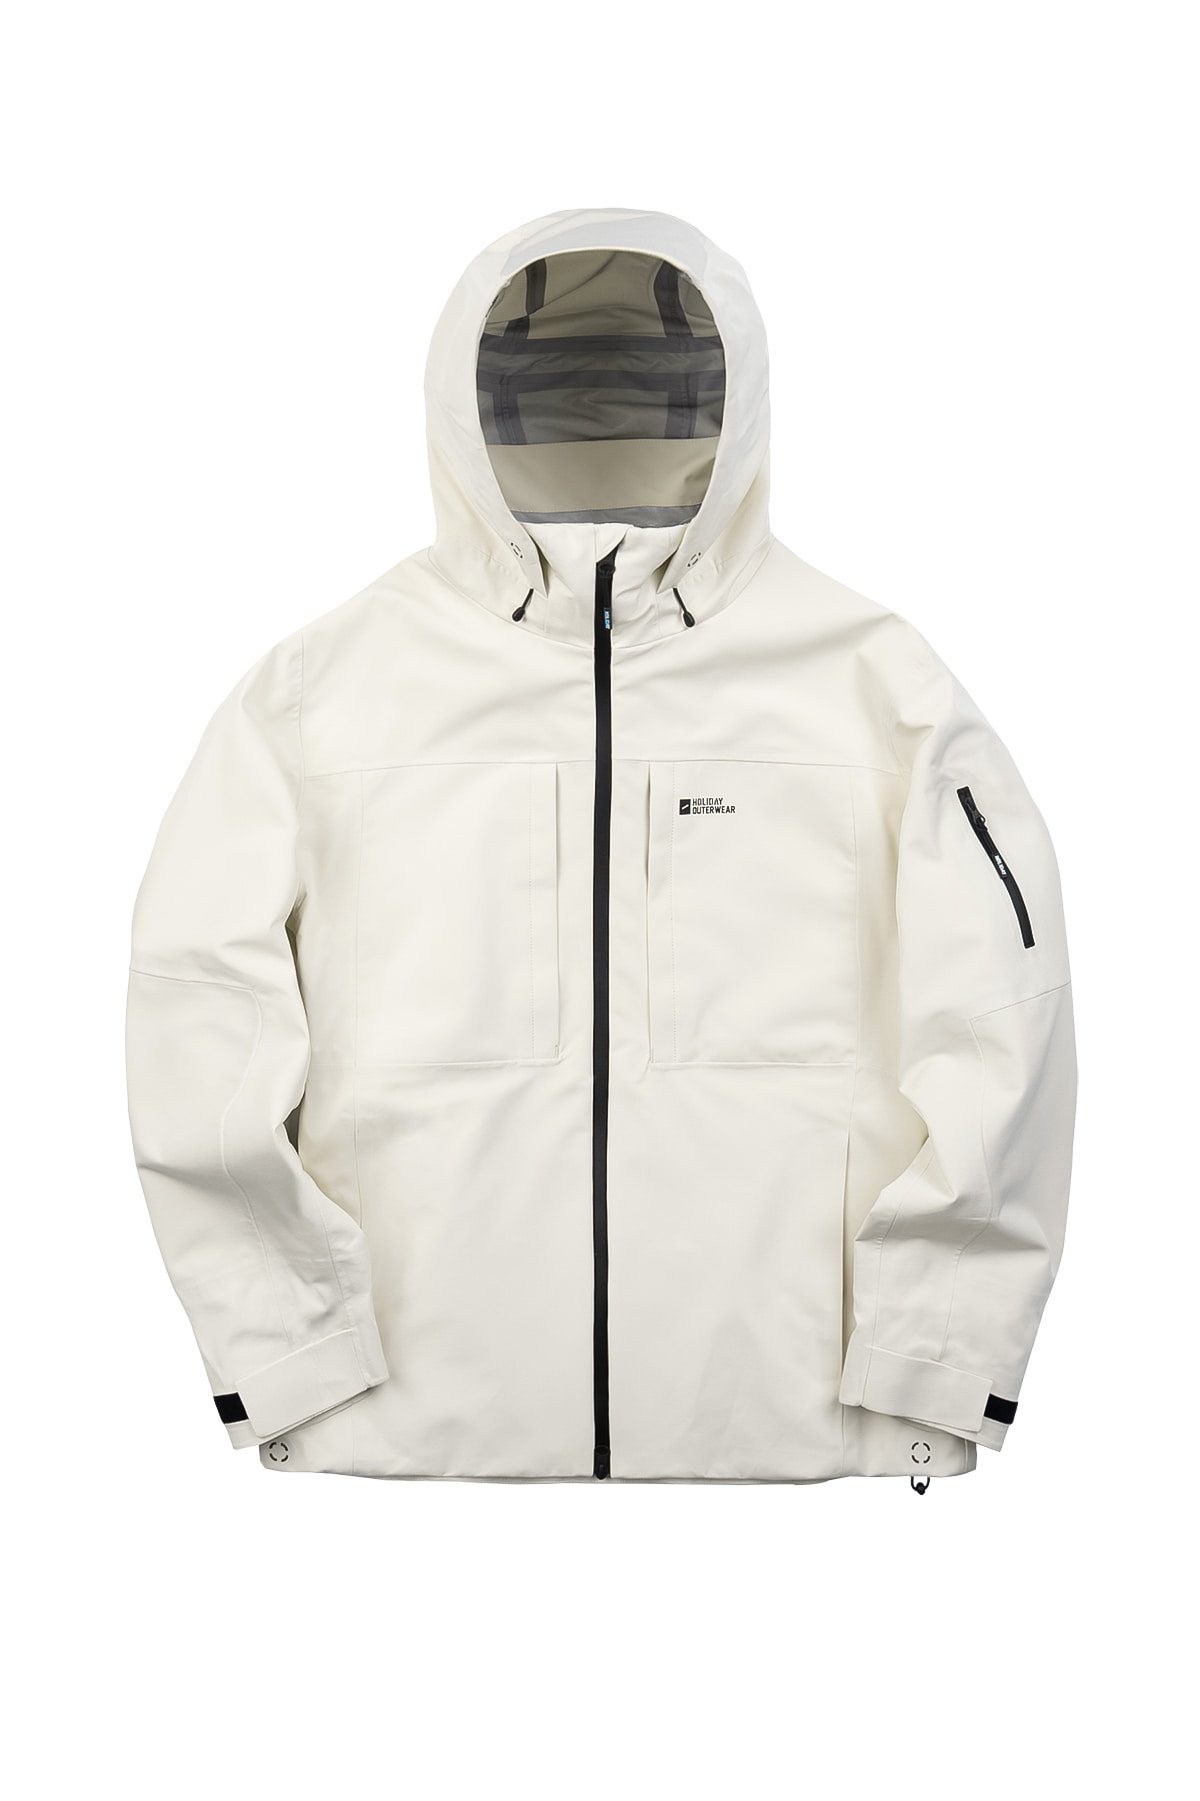 SUMMIT 3L JACKET[3layer]-BUTTER CREAMHOLIDAY OUTERWEAR